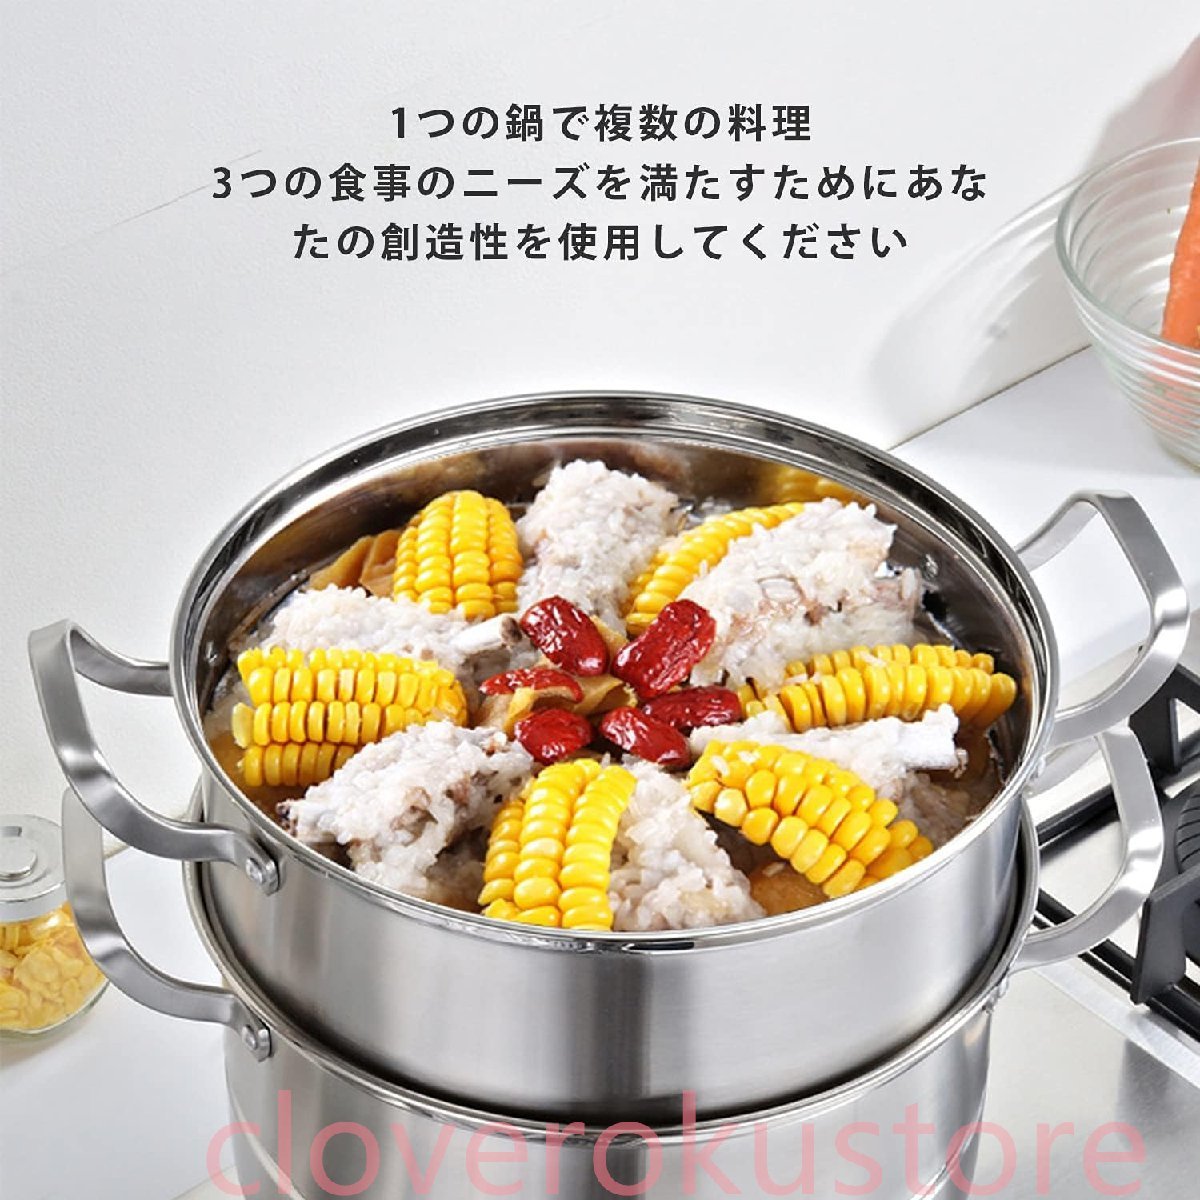 .. saucepan steamer full .3 layer bottom deep type all sorts . source correspondence glass saucepan cover attaching stainless steel stainless steel steel hour short explosion proof cookware ru. source correspondence size : 32cm